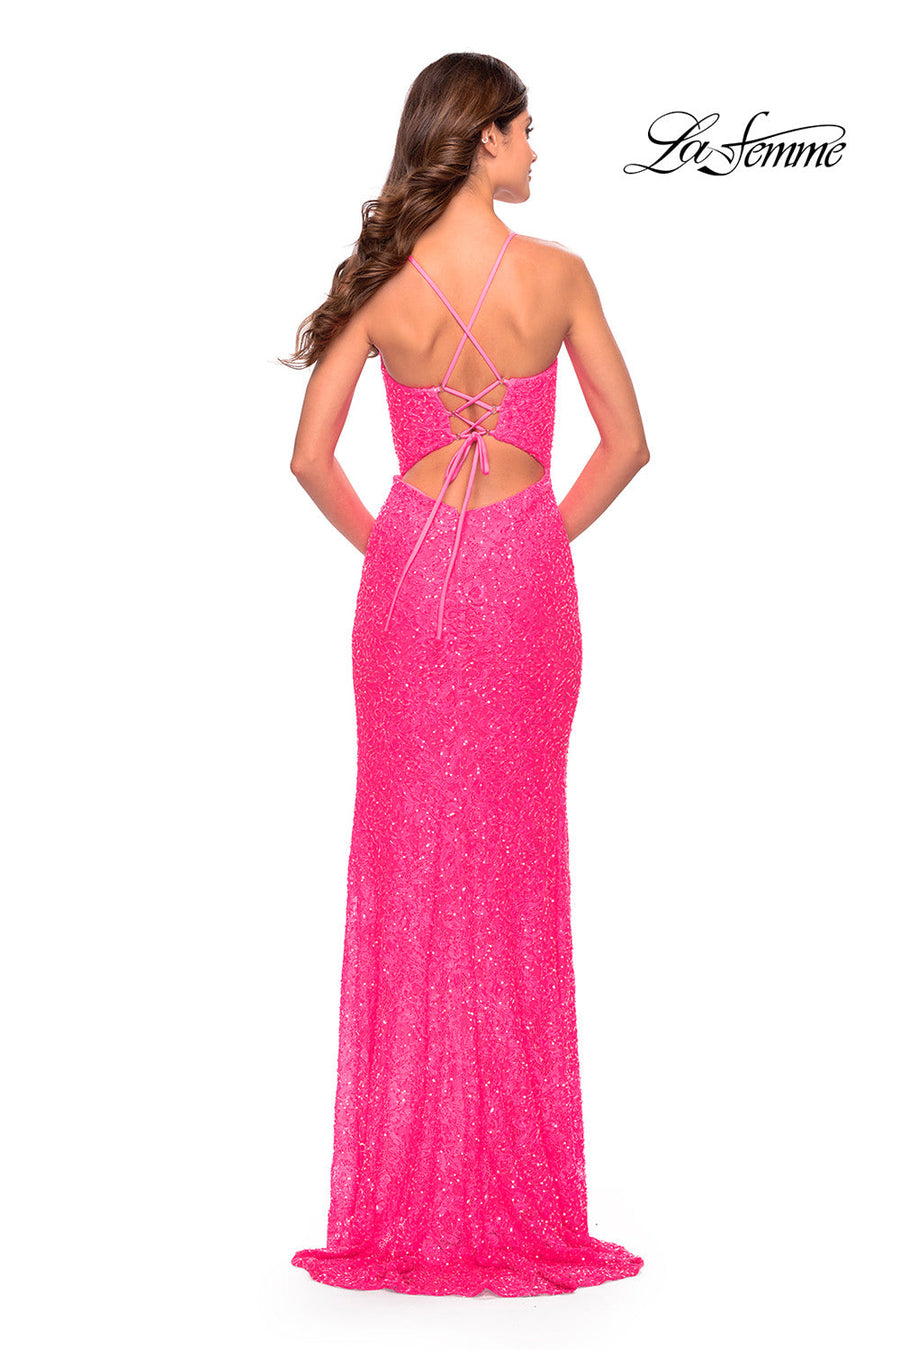 La Femme 31388 prom dress images.  La Femme 31388 is available in these colors: Neon Pink, Royal Blue, Sage.